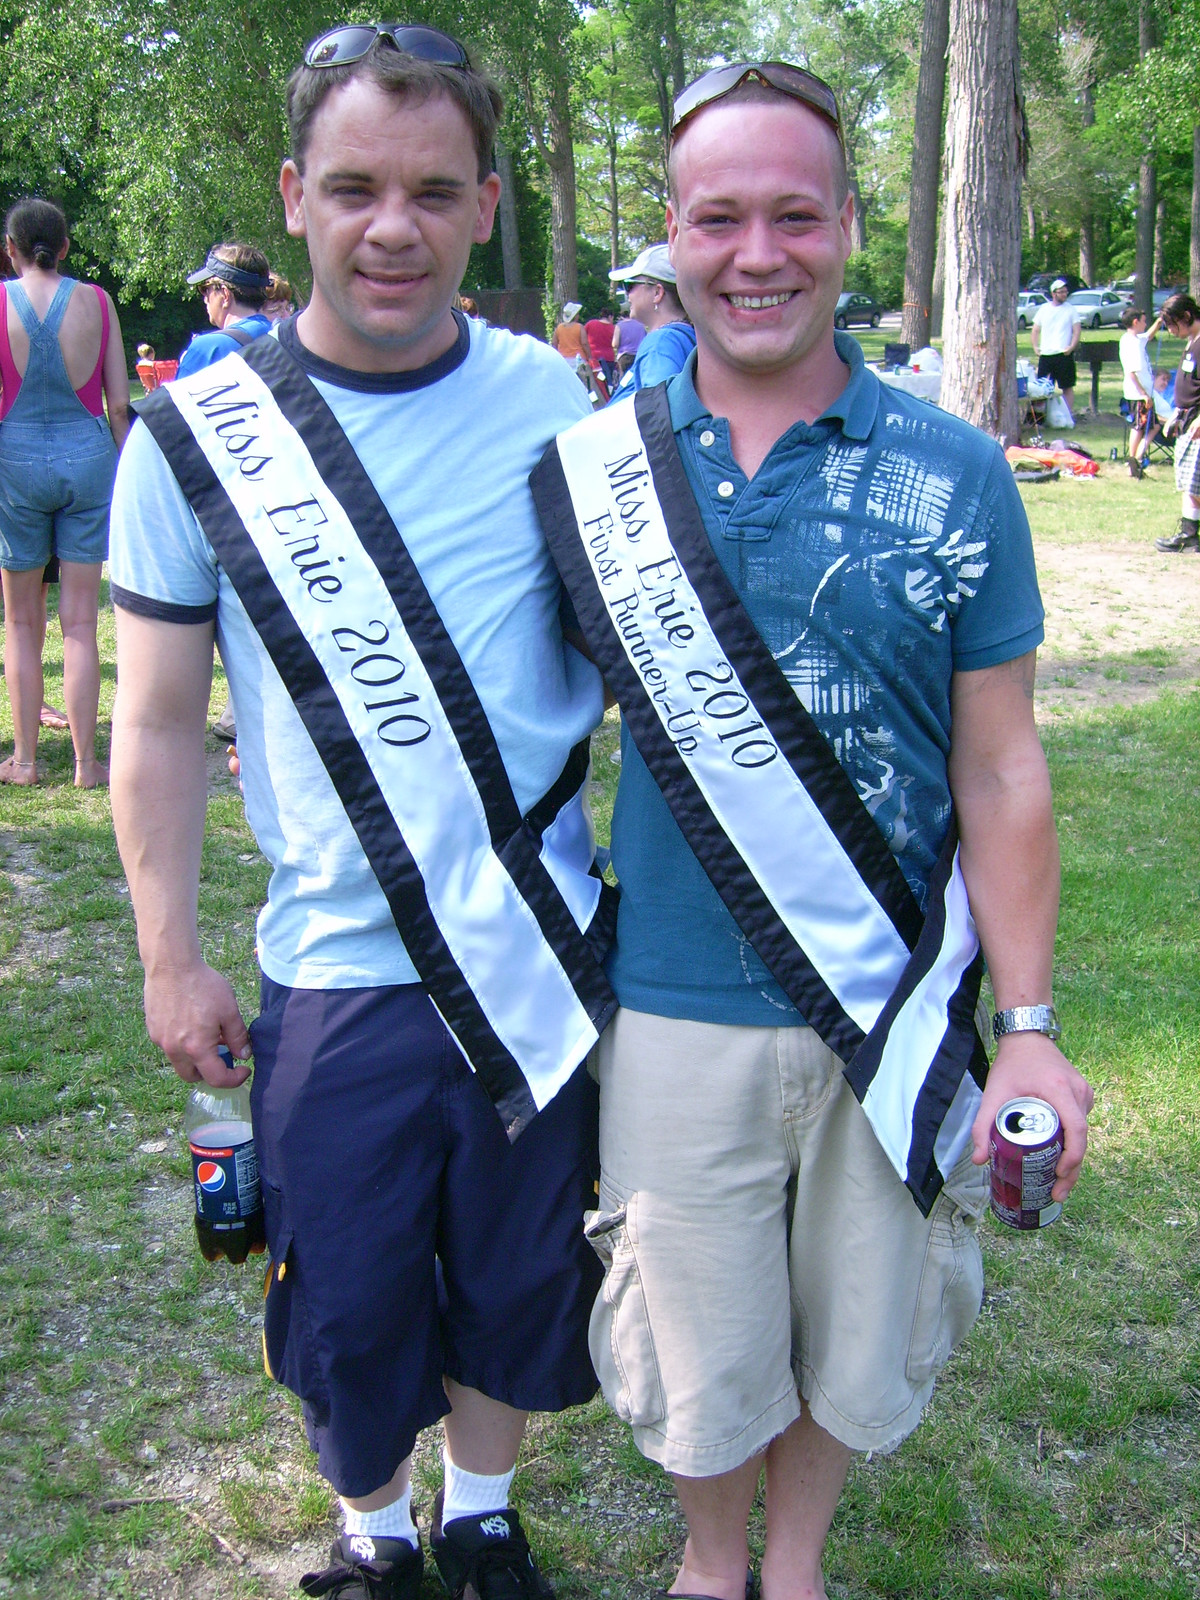 Buddy/Buffy and Dan/Paris, Miss Erie 2010 and Miss Erie 2010 Runner Up. Photo by James von Loewe